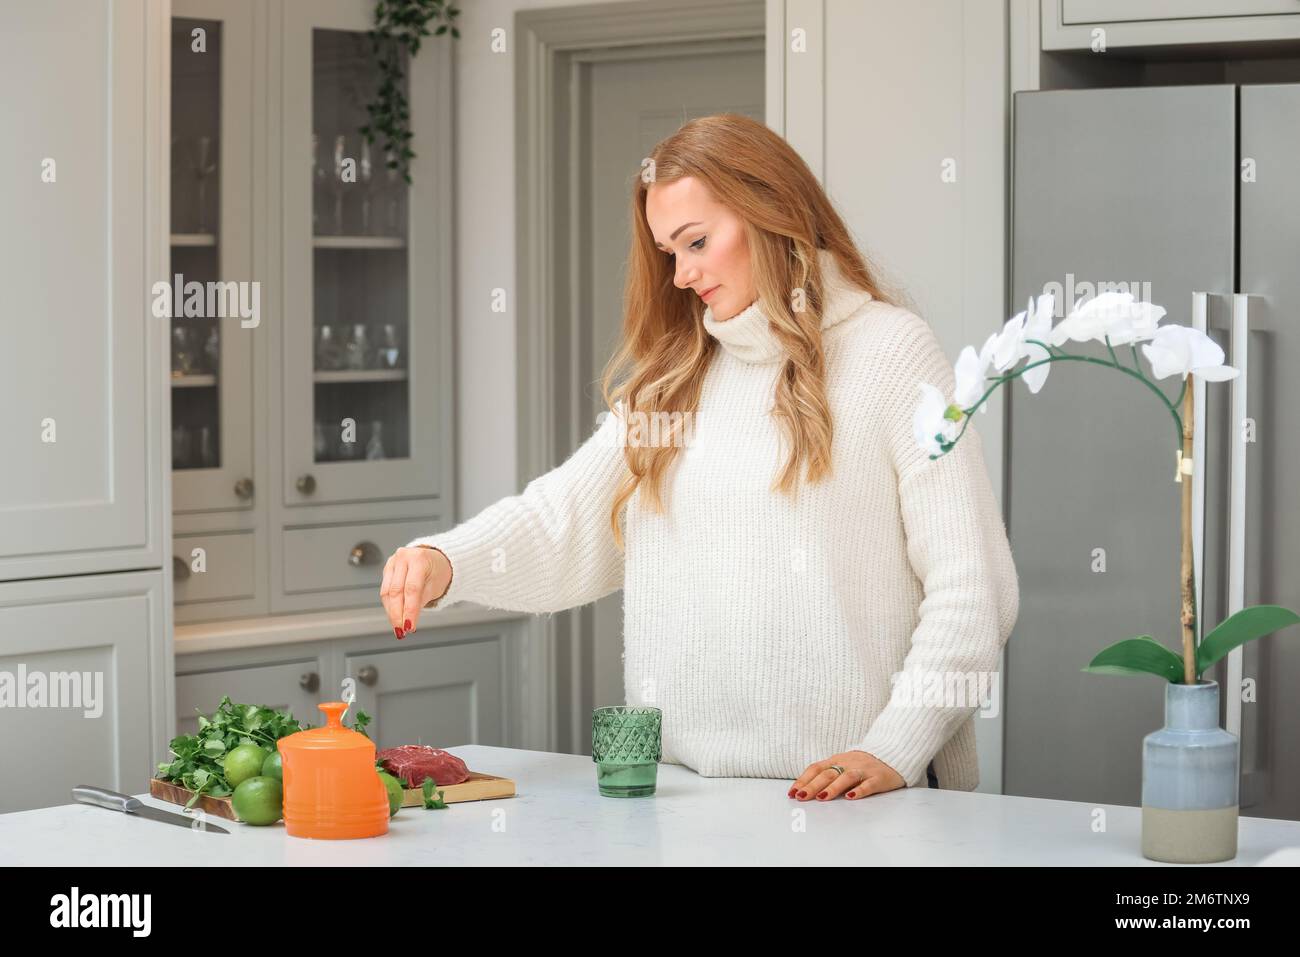 Young woman is preparing in the kitchen. Healthy Food. Salad. Diet. Dieting Concept. Healthy Lifestyle. Cooking At Home. Prepare Food. Stock Photo